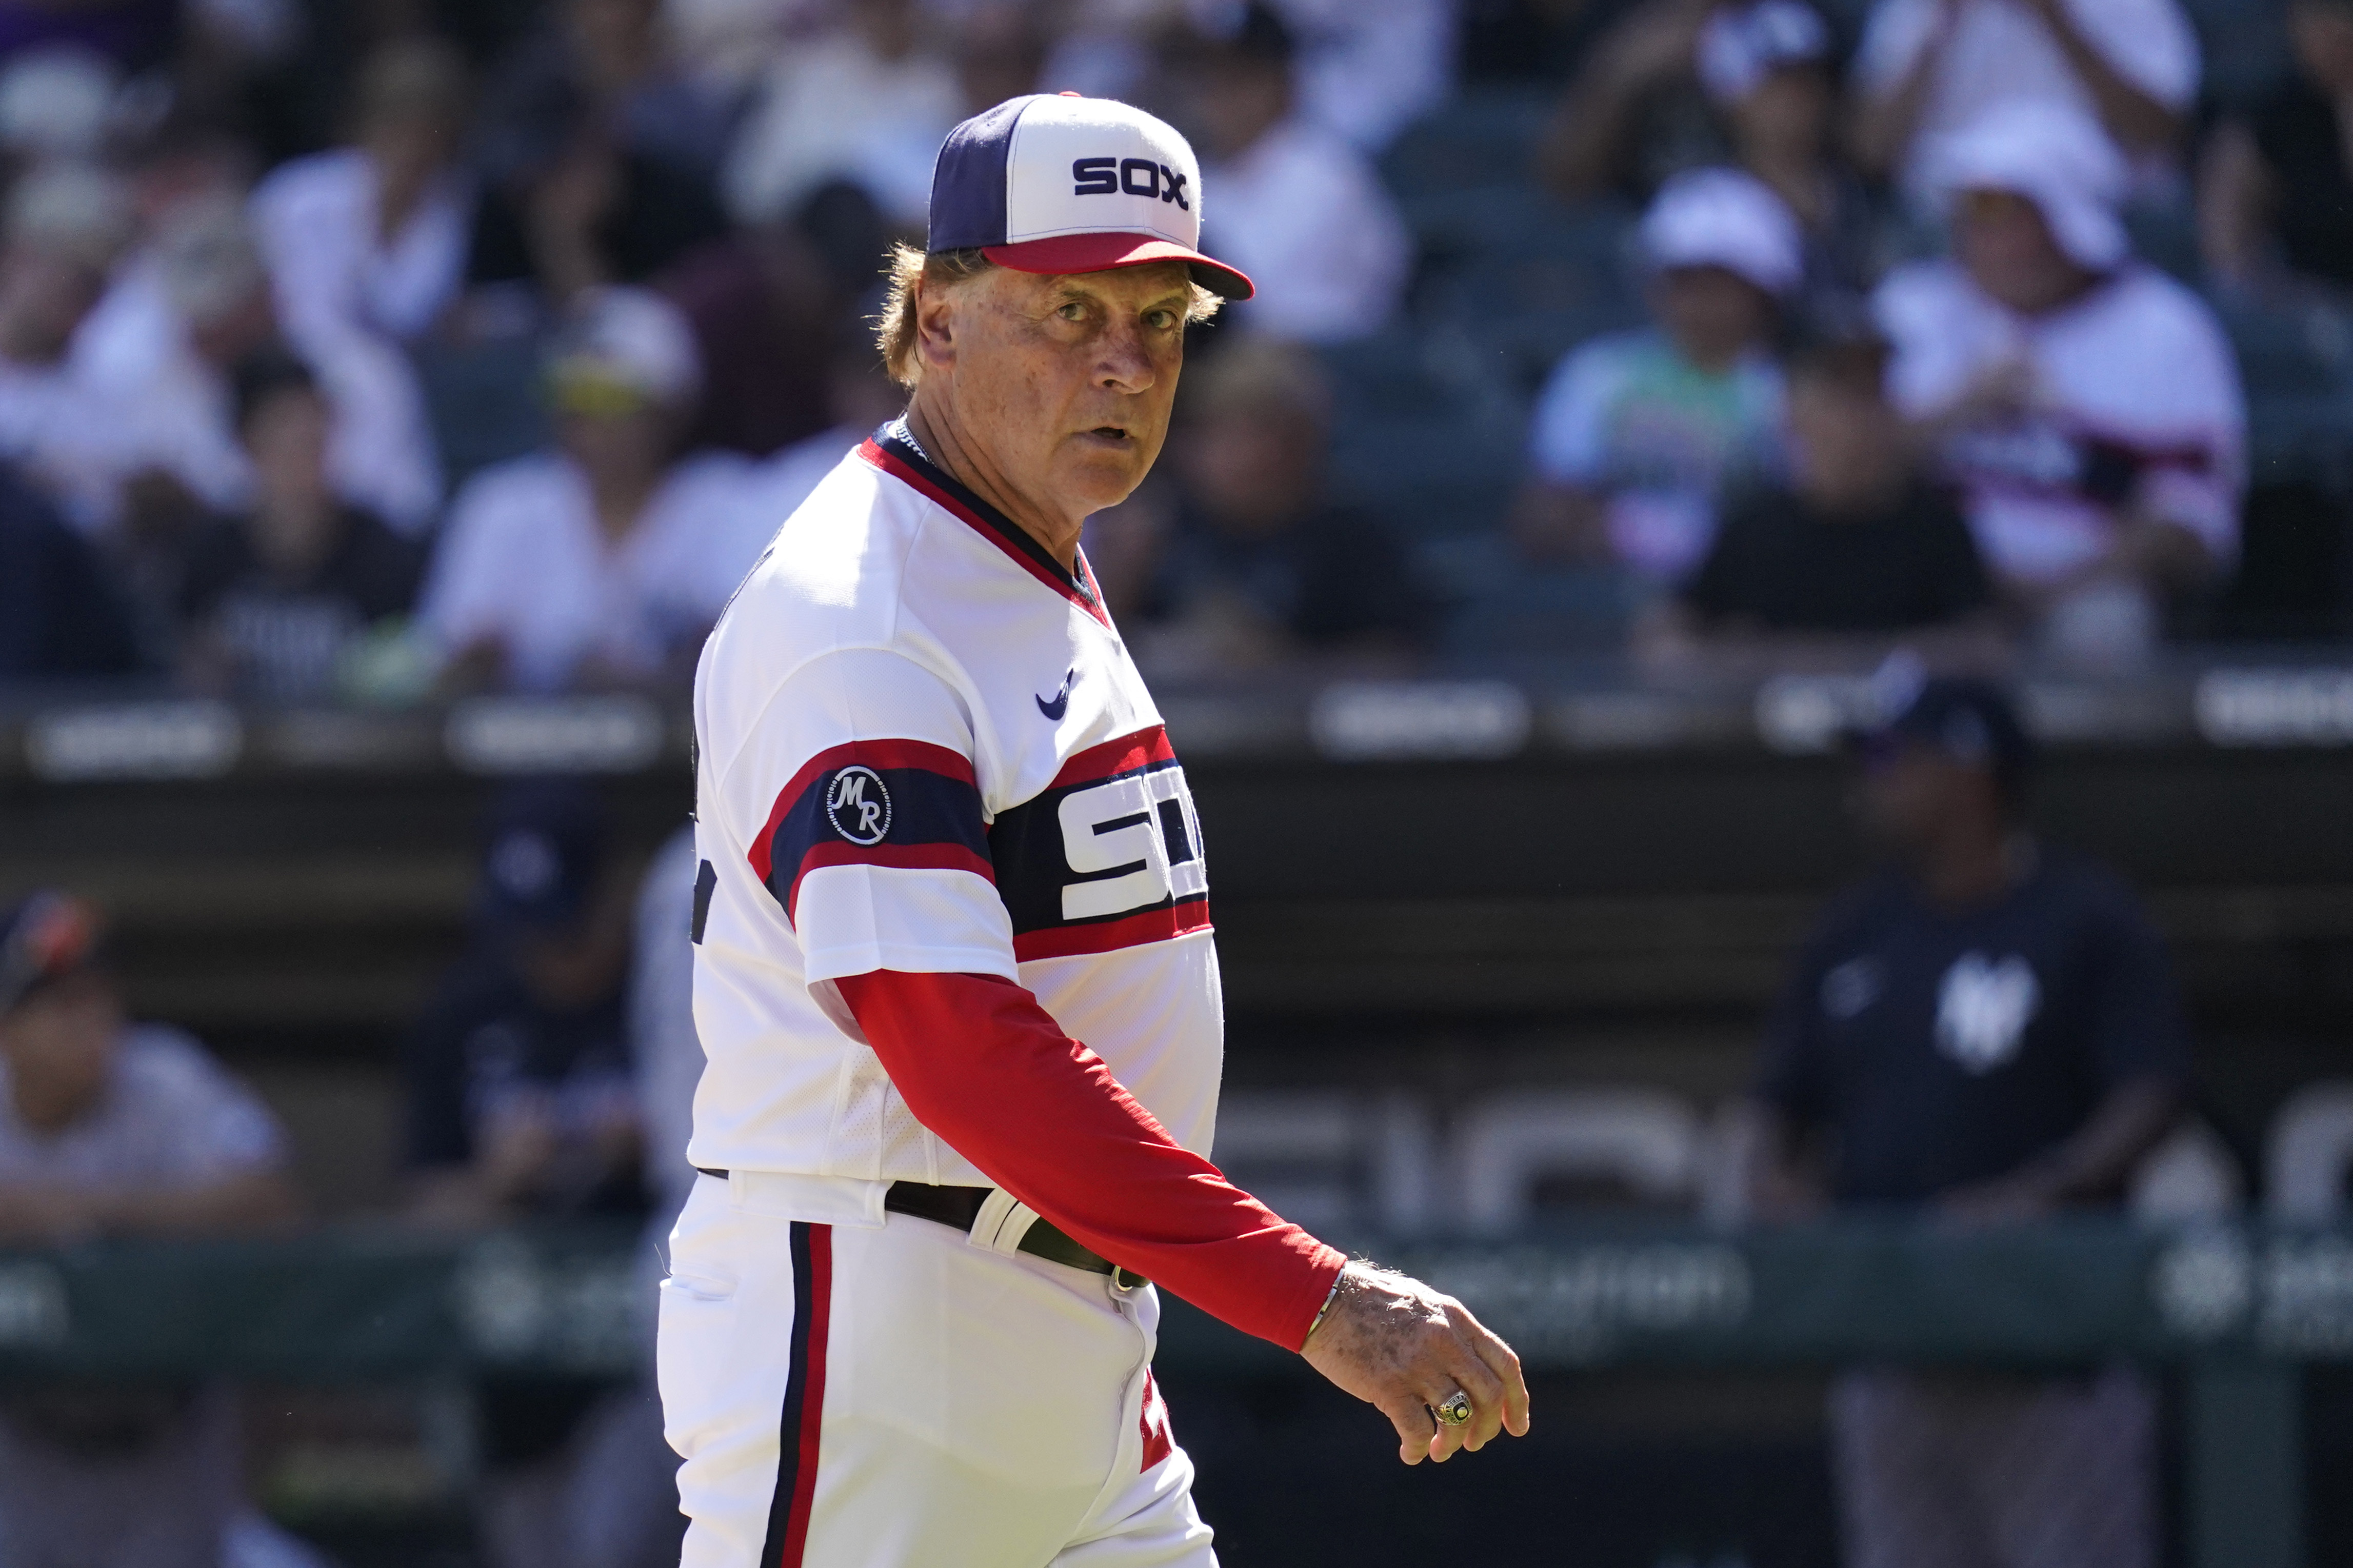 Tony La Russa dragged after he dozes off in White Sox dugout